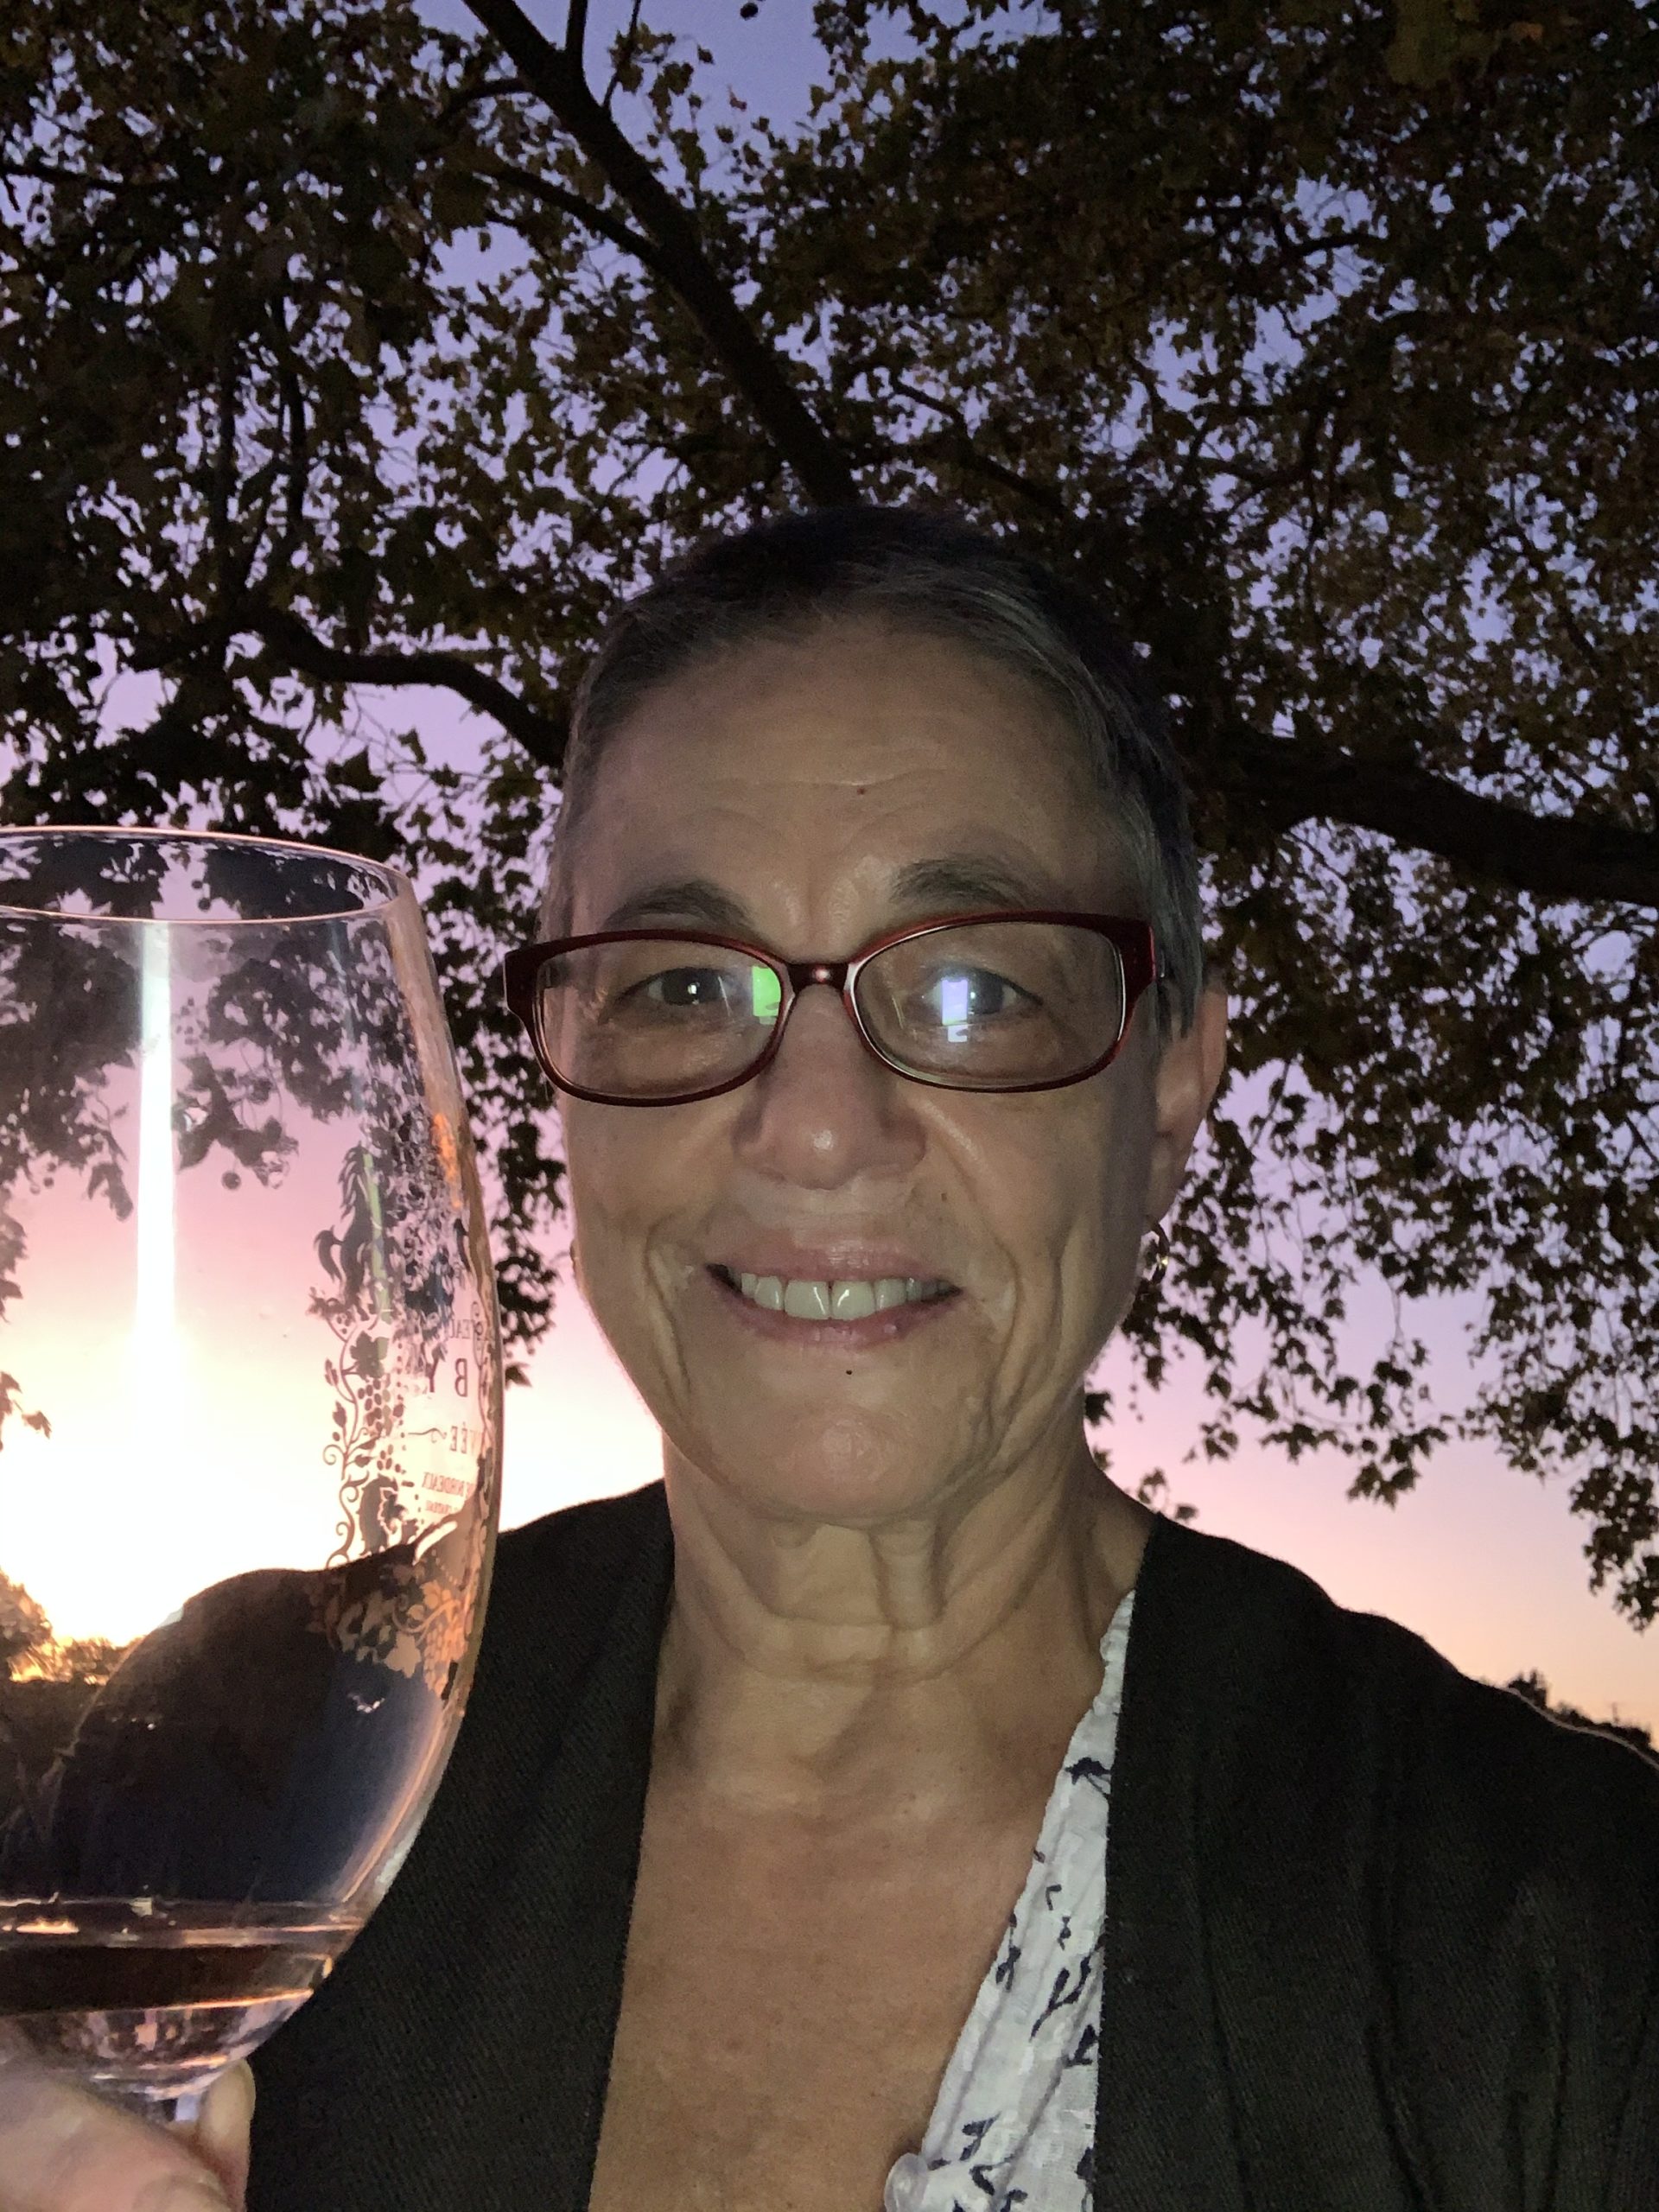 Maxine Borcherding, Taste and Compare Academy of Wine Spirits and Food, OR, USA